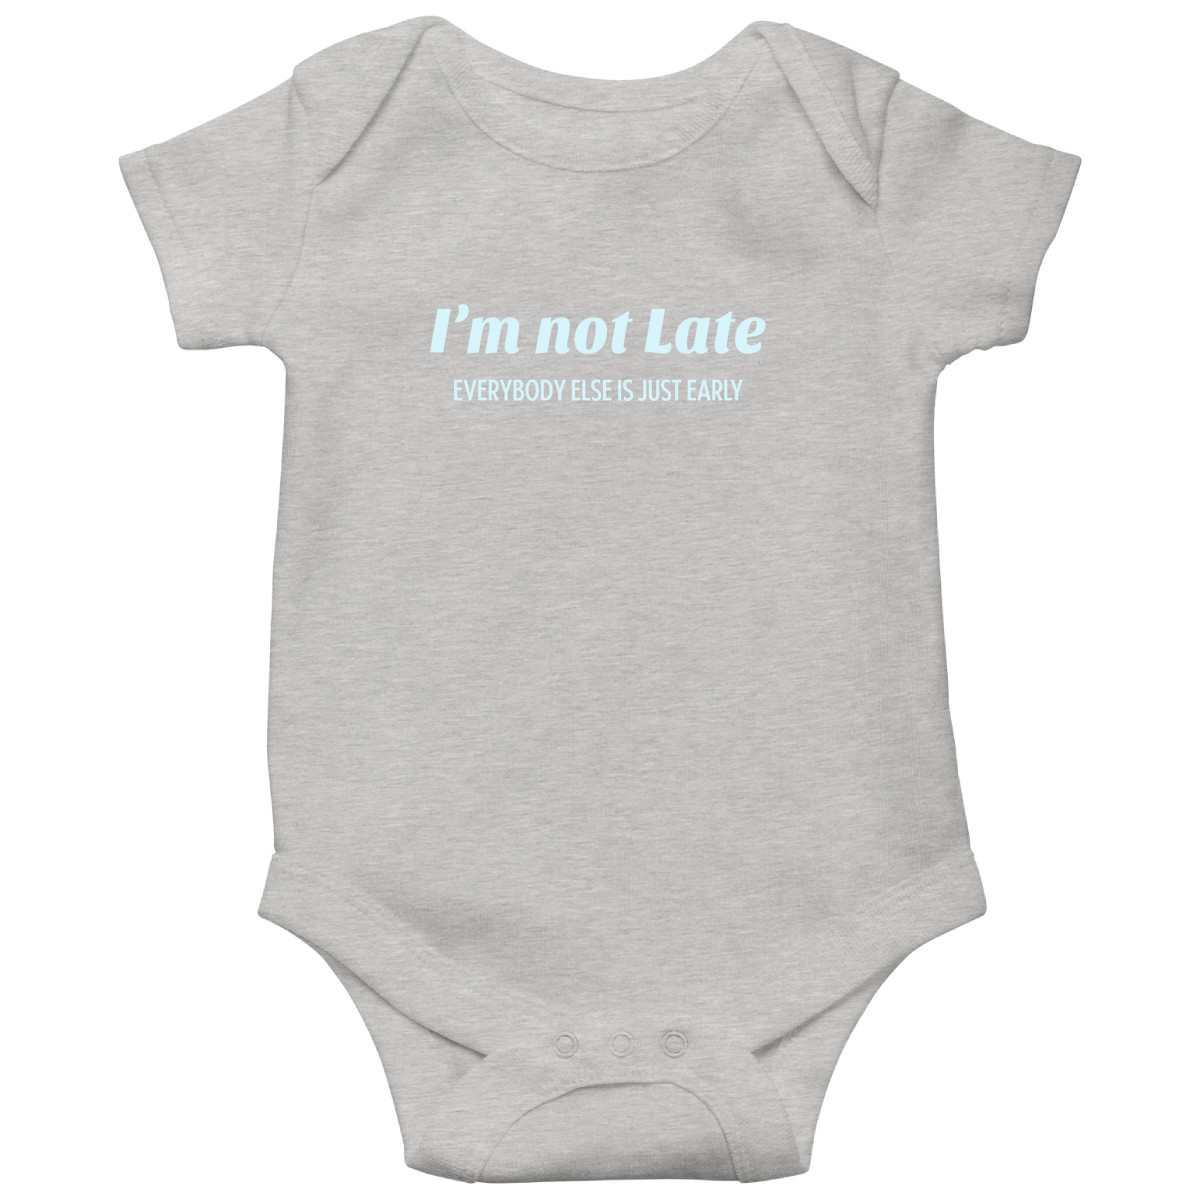 I’m not late everybody else is just early Baby Bodysuits | Gray